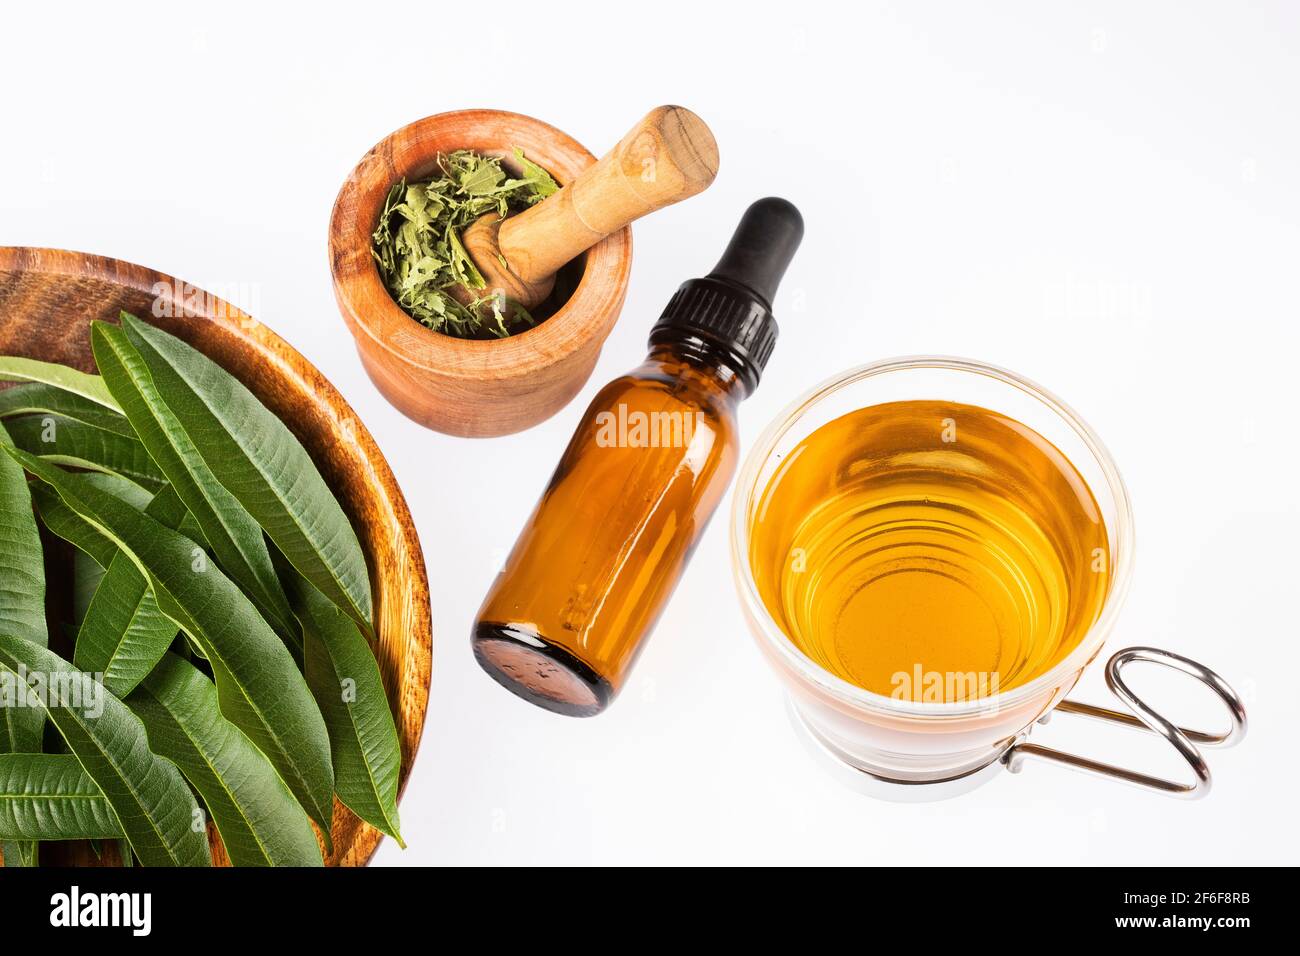 Lemon verbena herb essential oil and text label. Aromatic and therapeutic  plant. Aloysia citrodora herbal tea and aromatherapy, homeopathy use Stock  Photo - Alamy